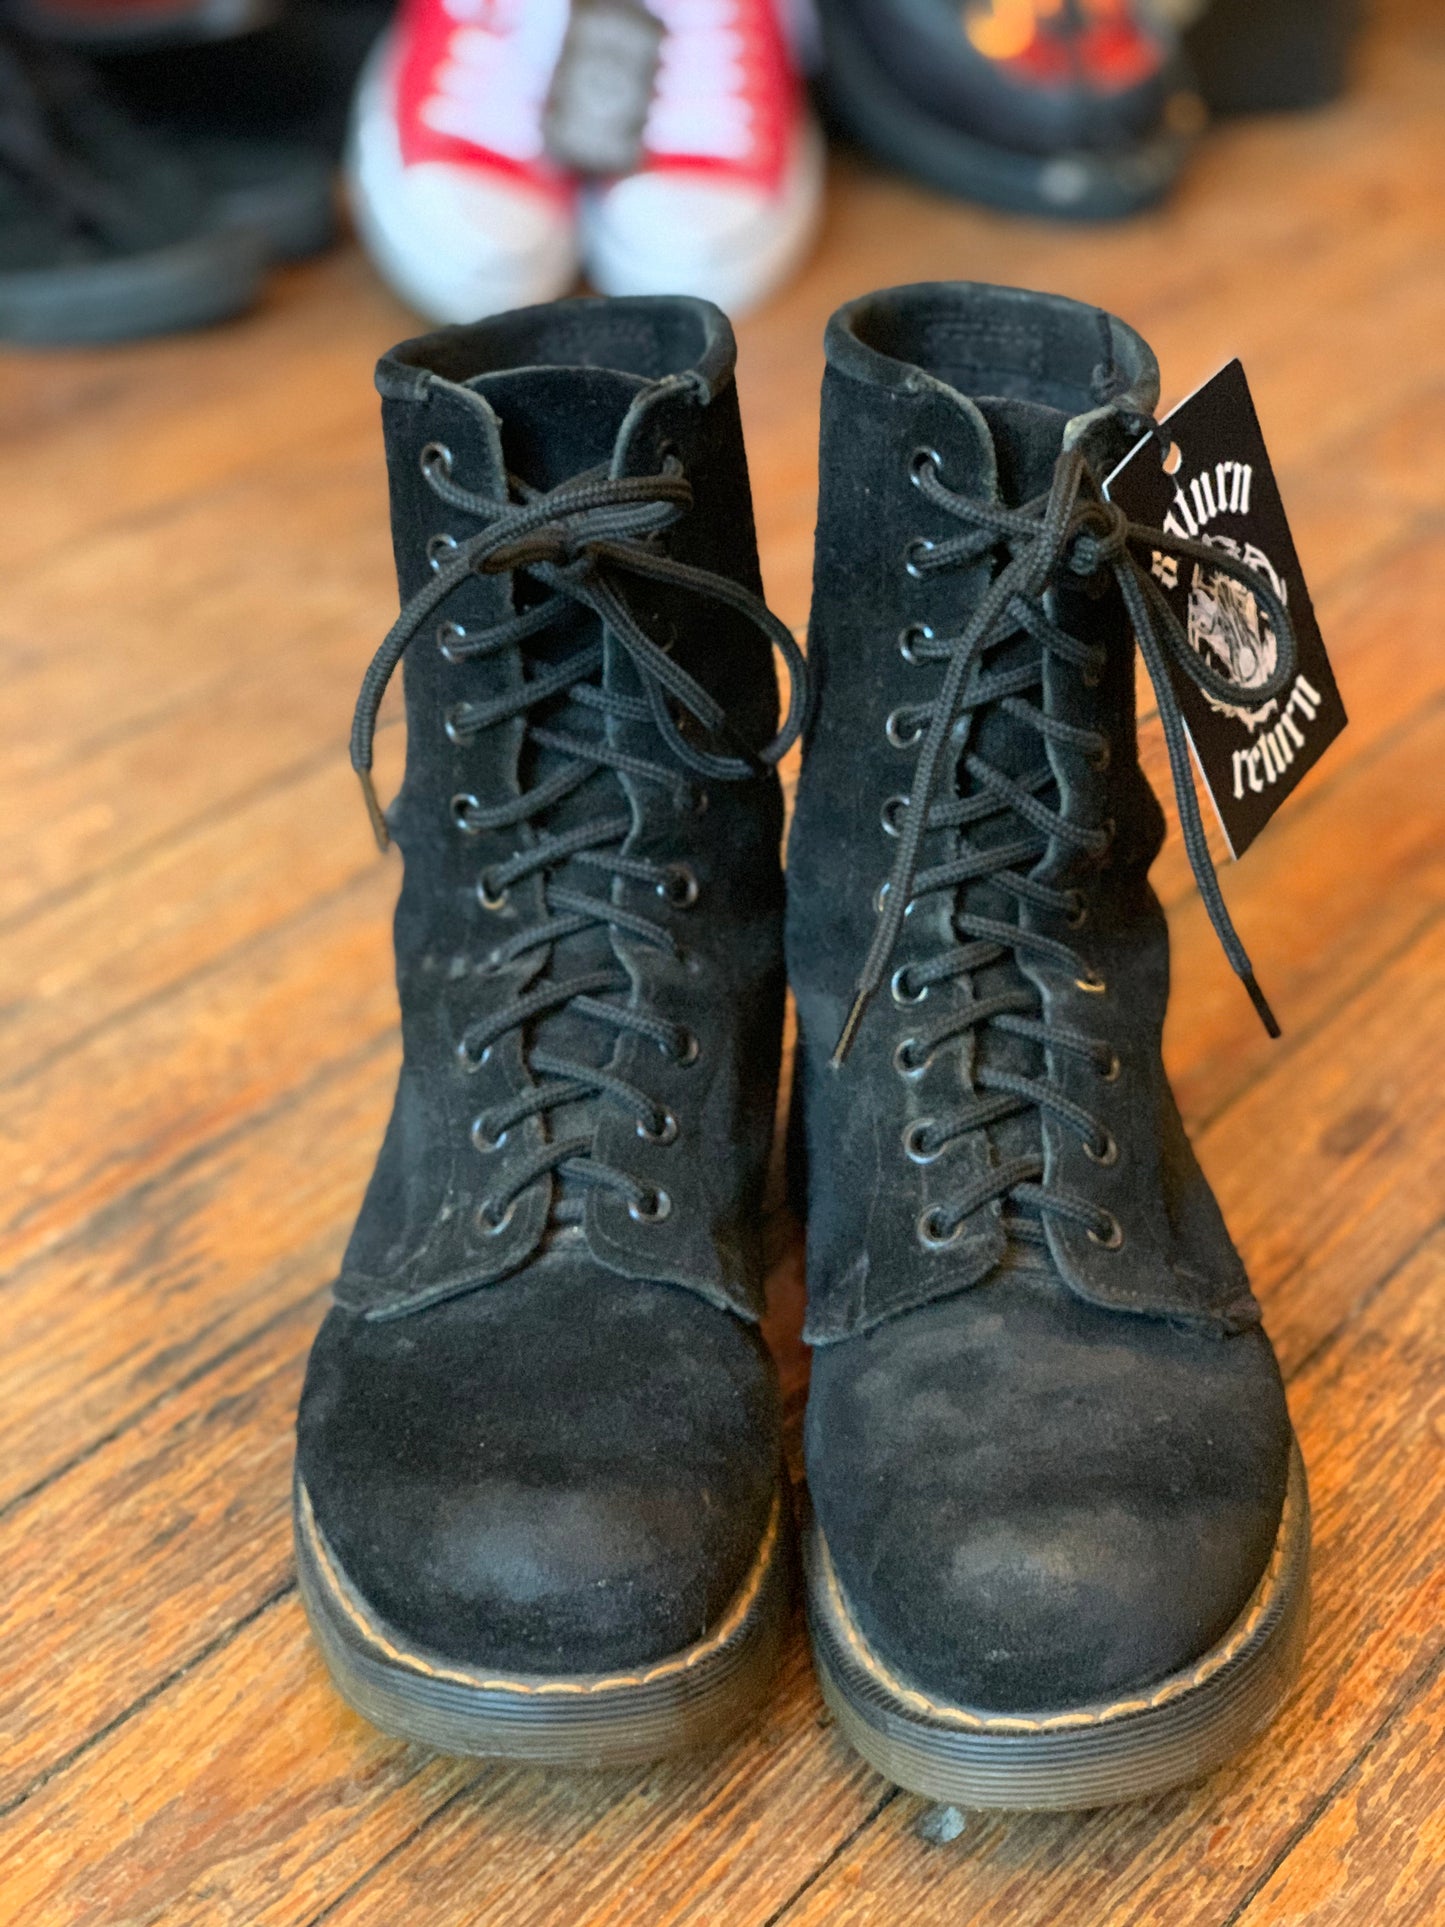 Made In England Black Suede 10 Eyelet Doc Martens Boots